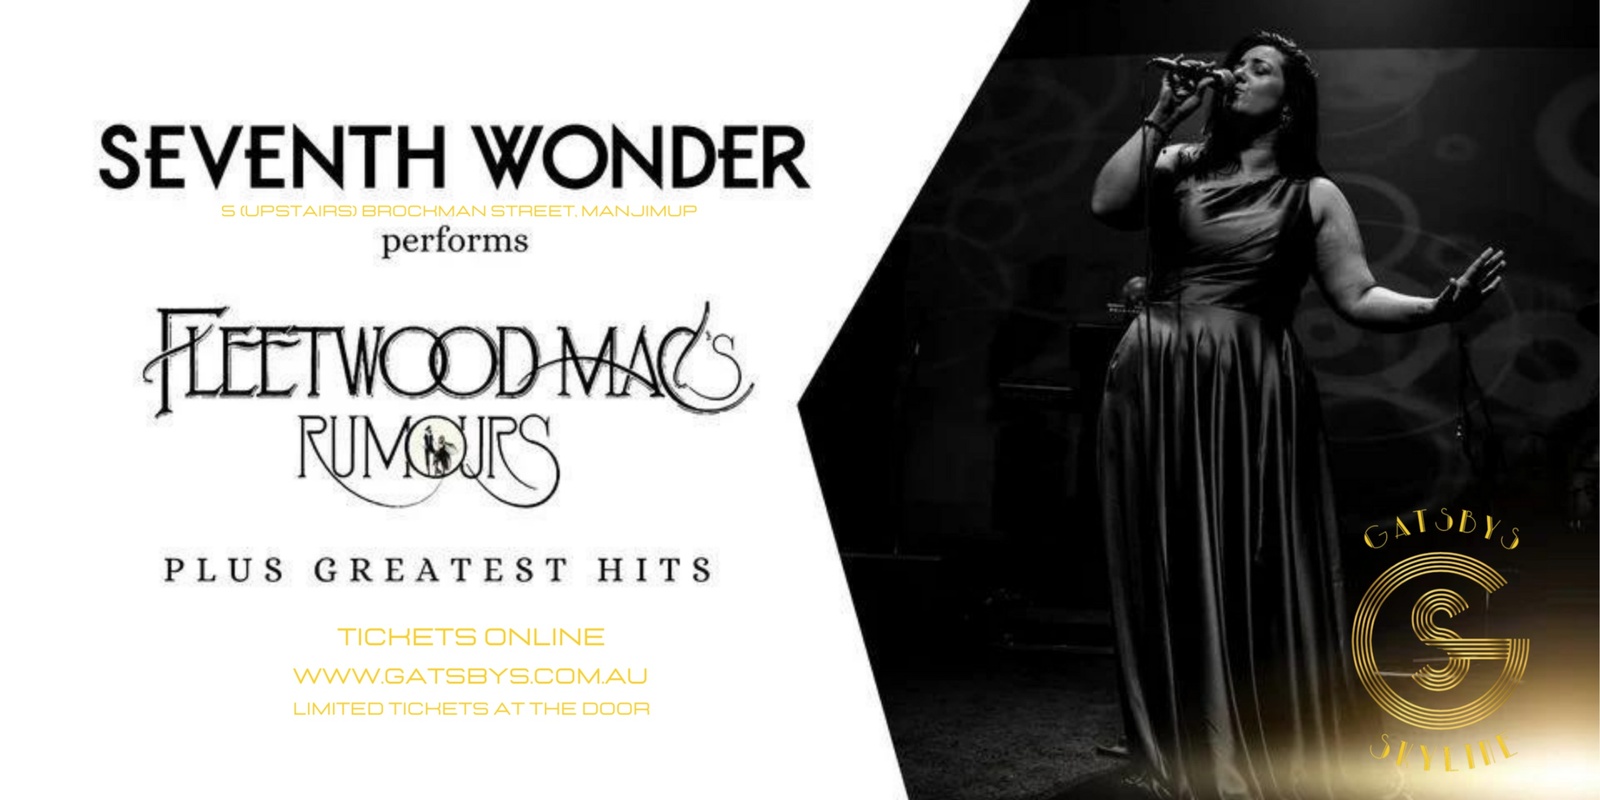 Banner image for Seventh Wonder performs Fleetwood Mac - Rumours and Greatest Hits